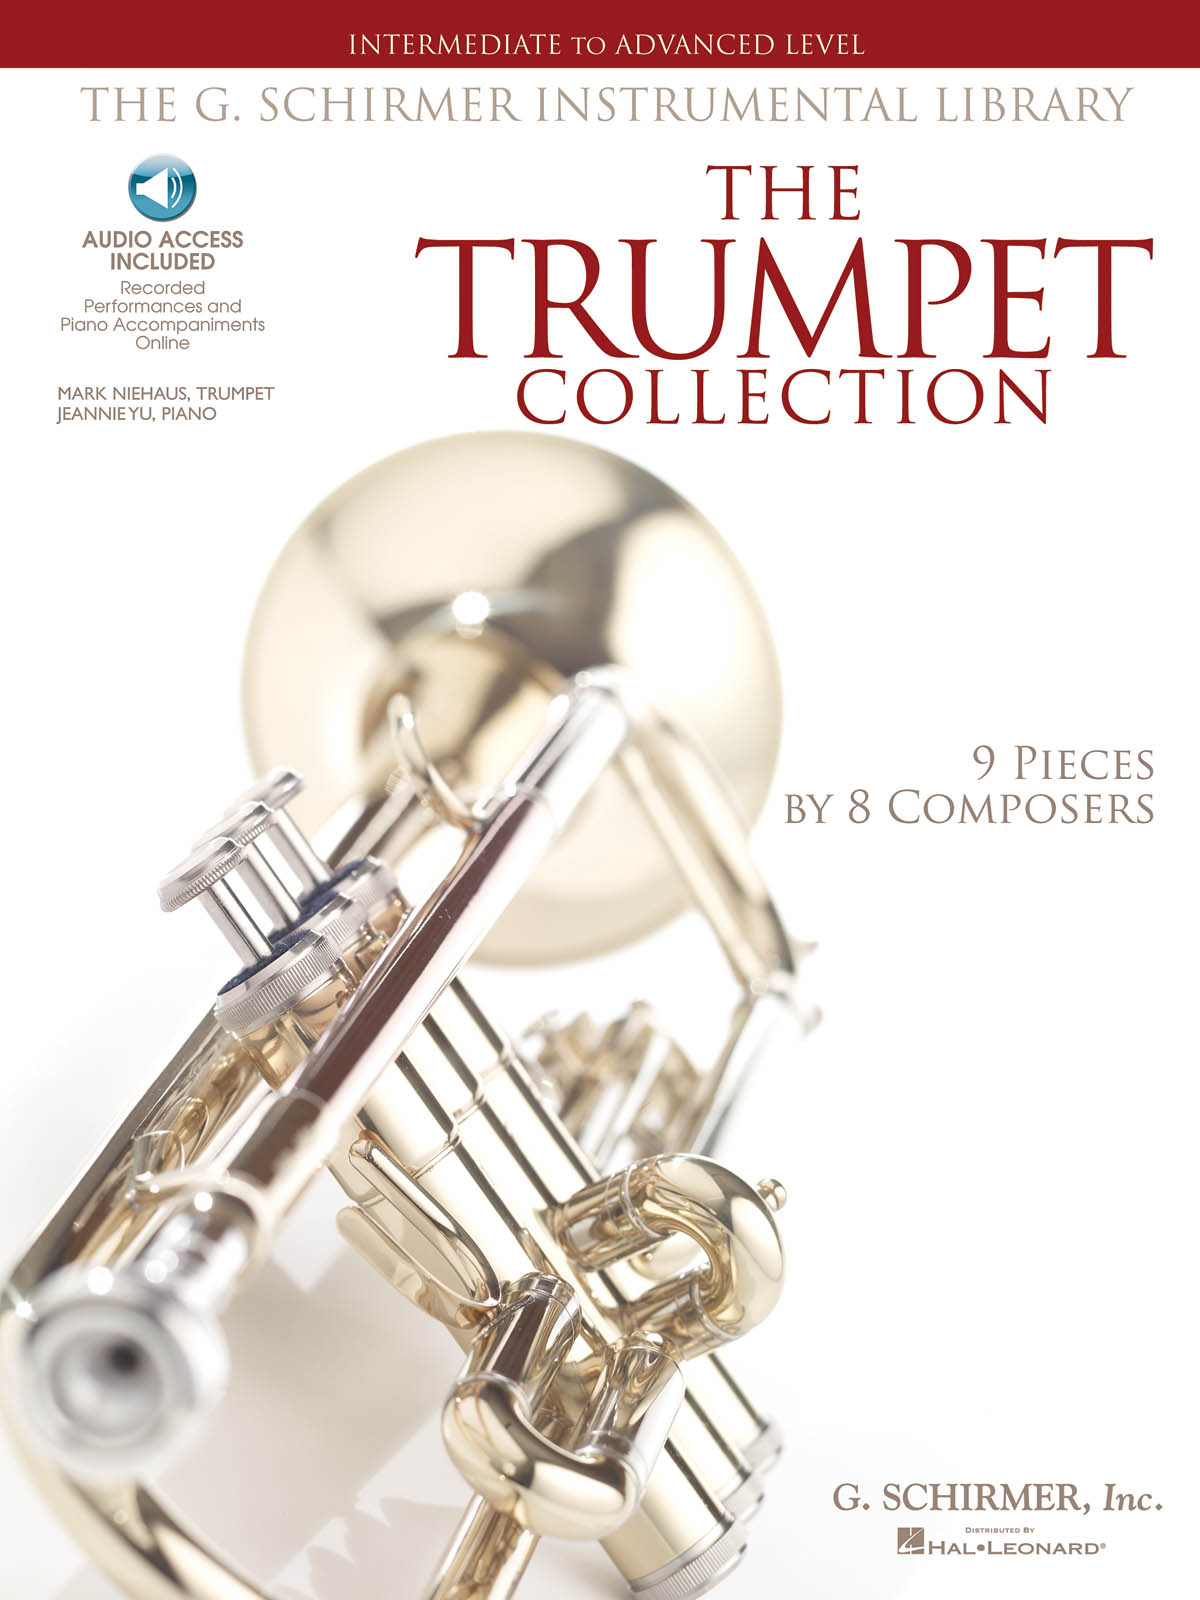 The Trumpet Collection - Intermediate to Advanced Level / G. Schirmer Instrumental Library